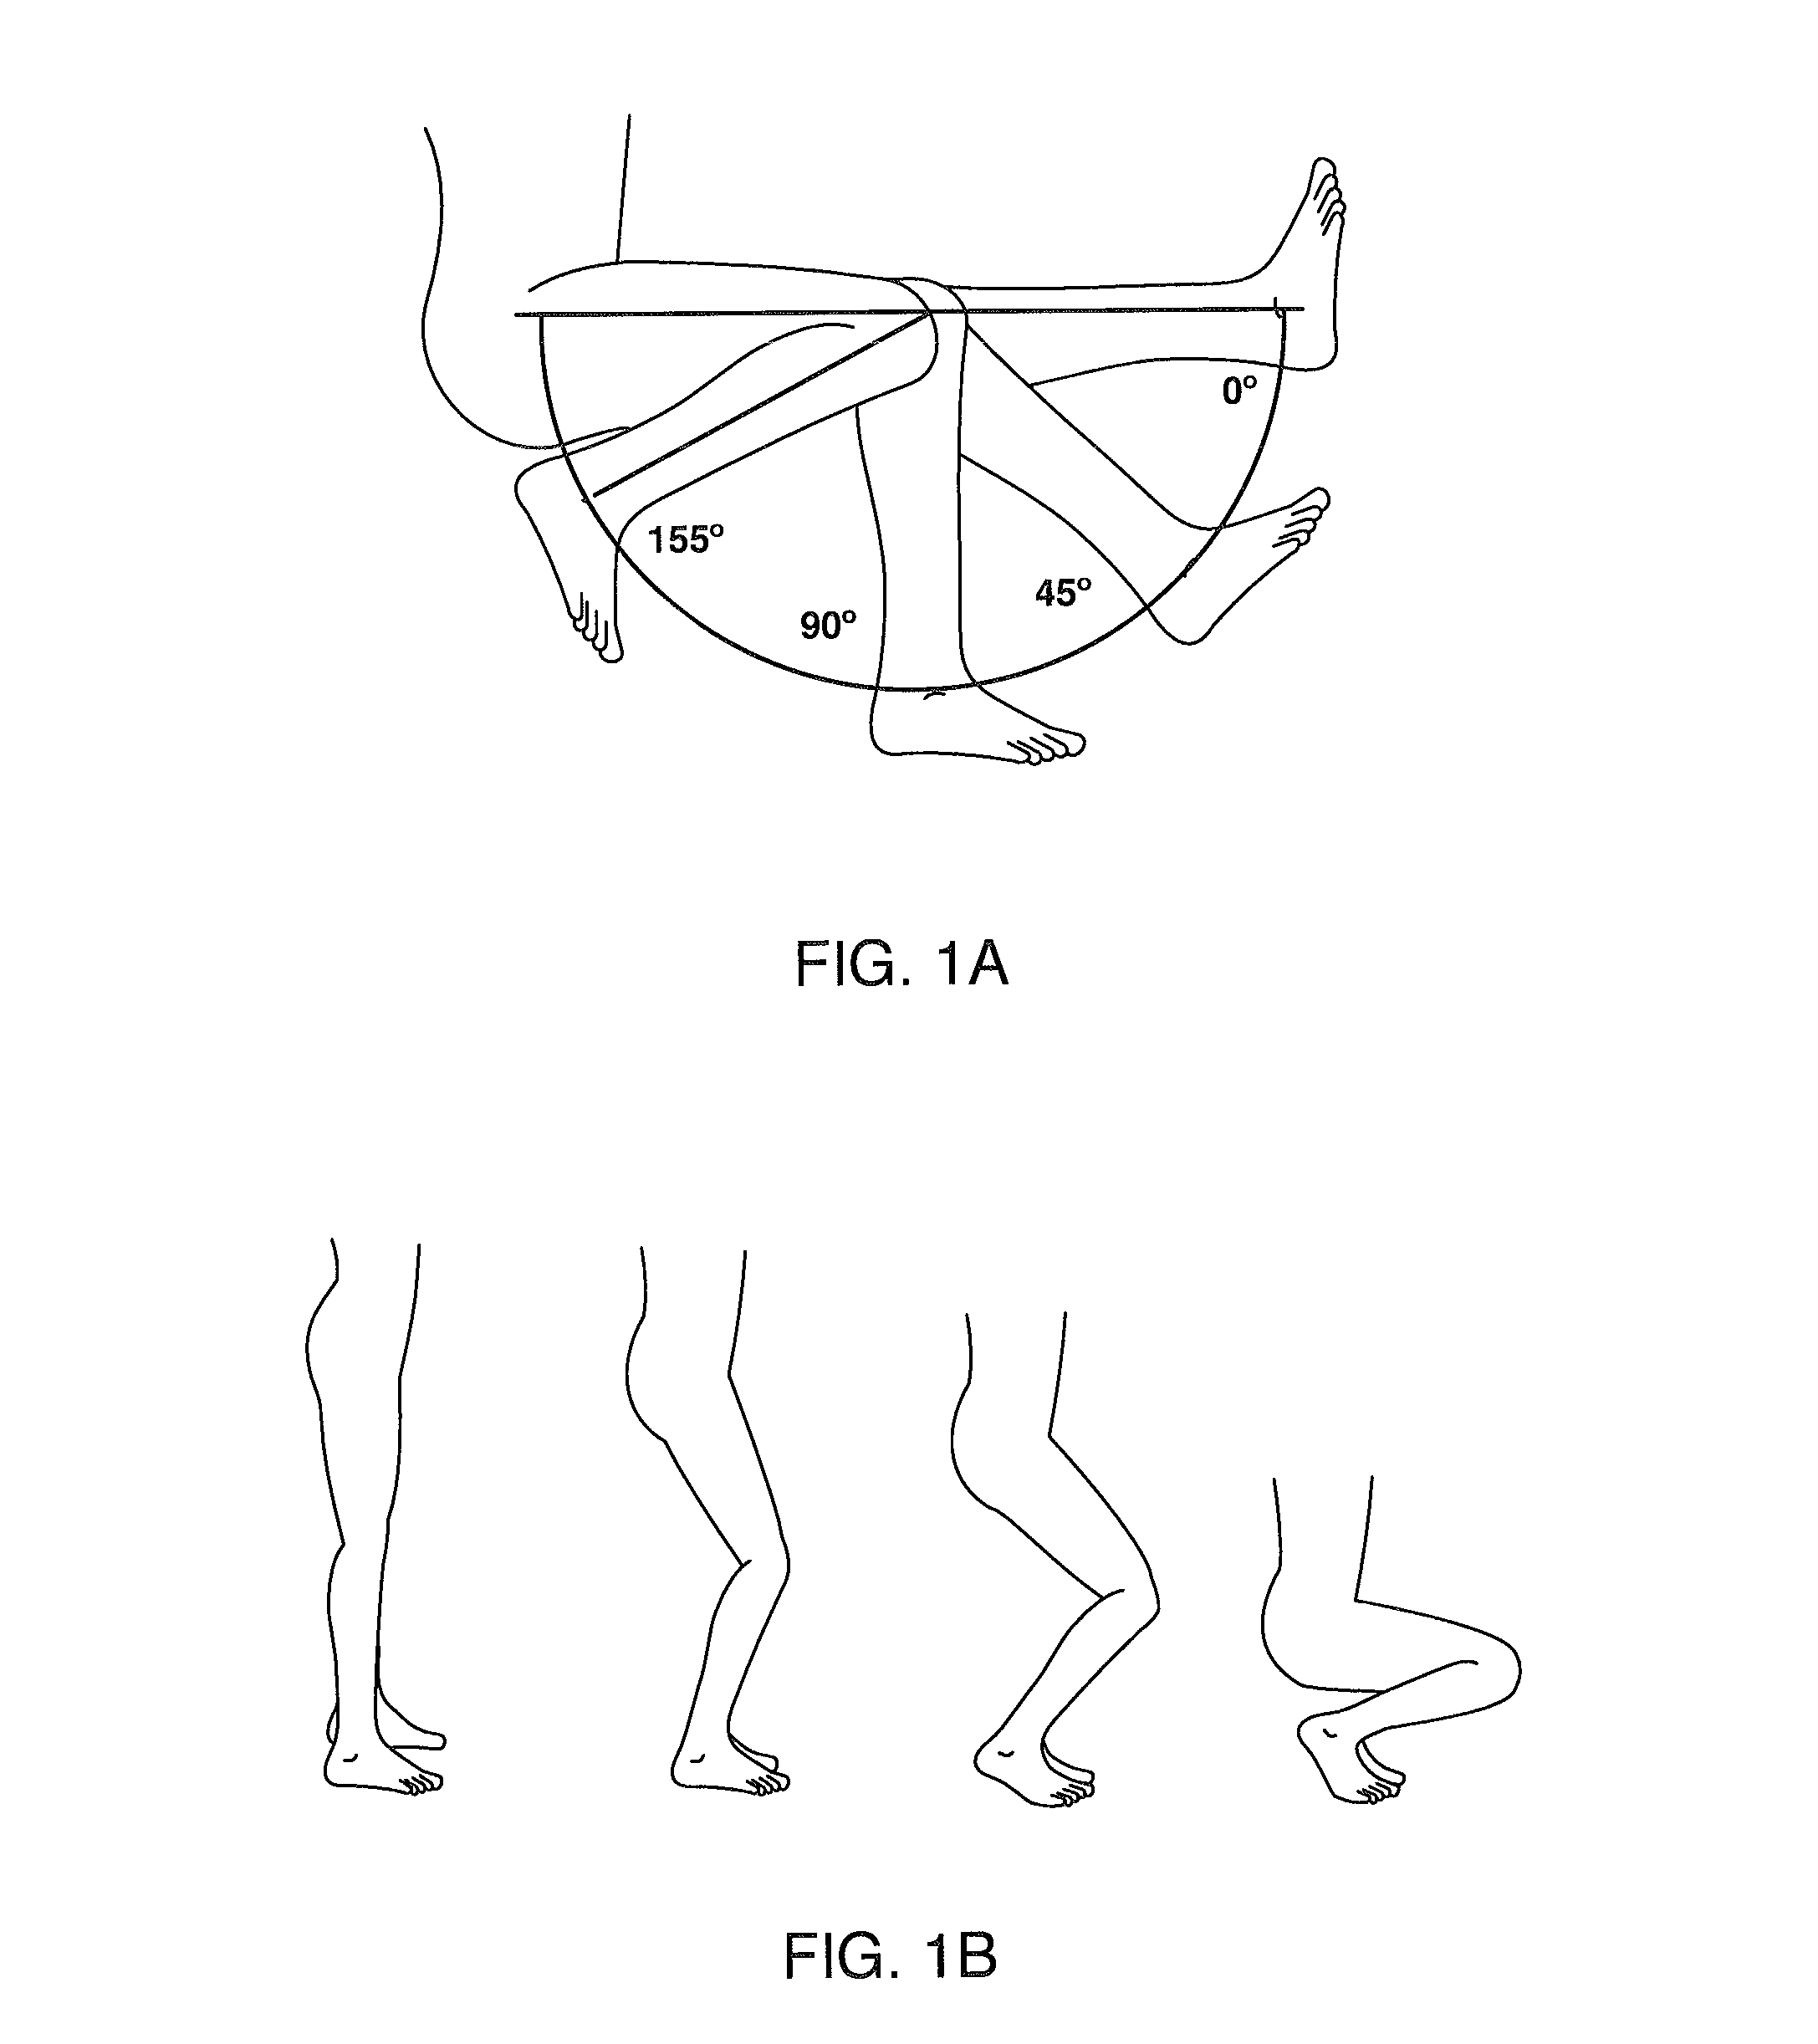 Systems and methods for providing a modular femoral component